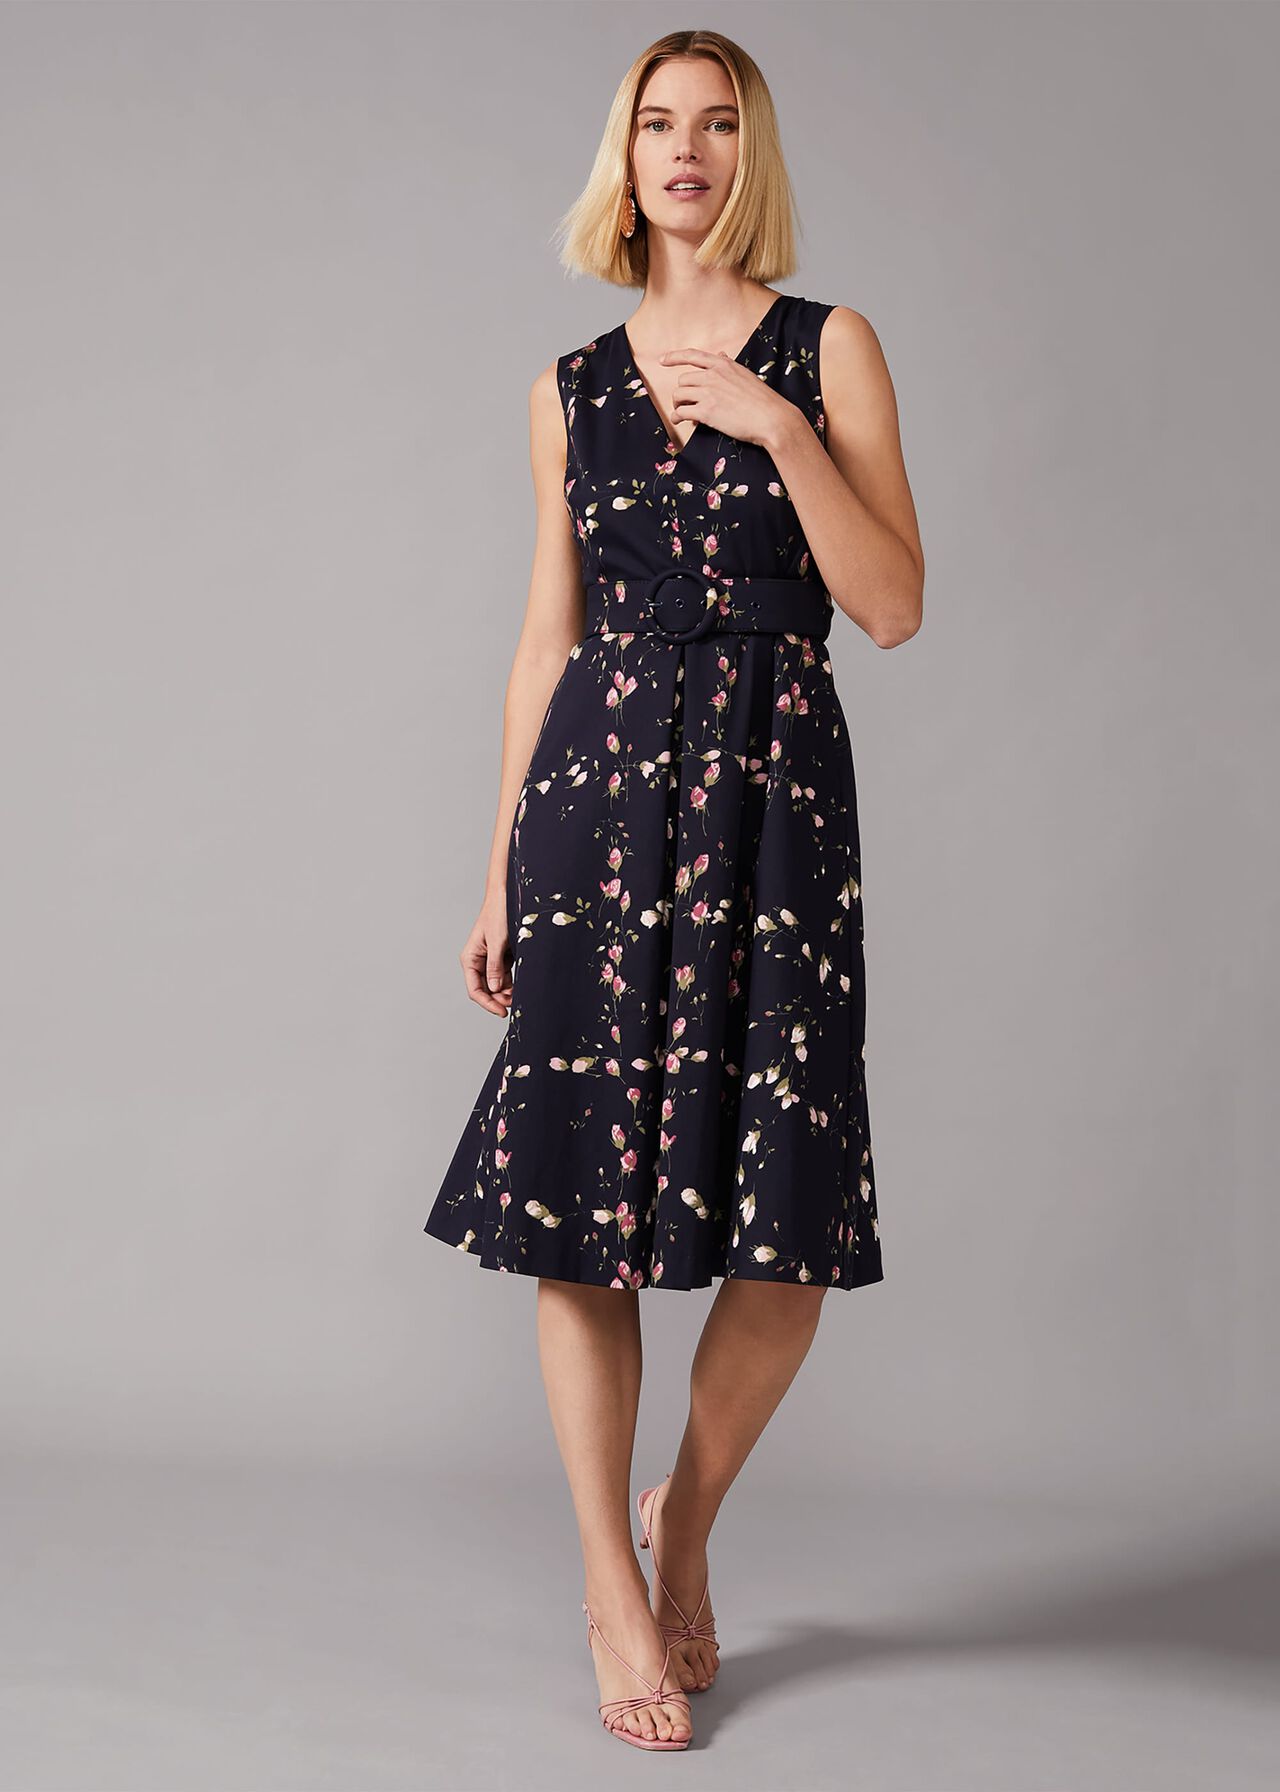 Nala Floral Fit And Flare Dress